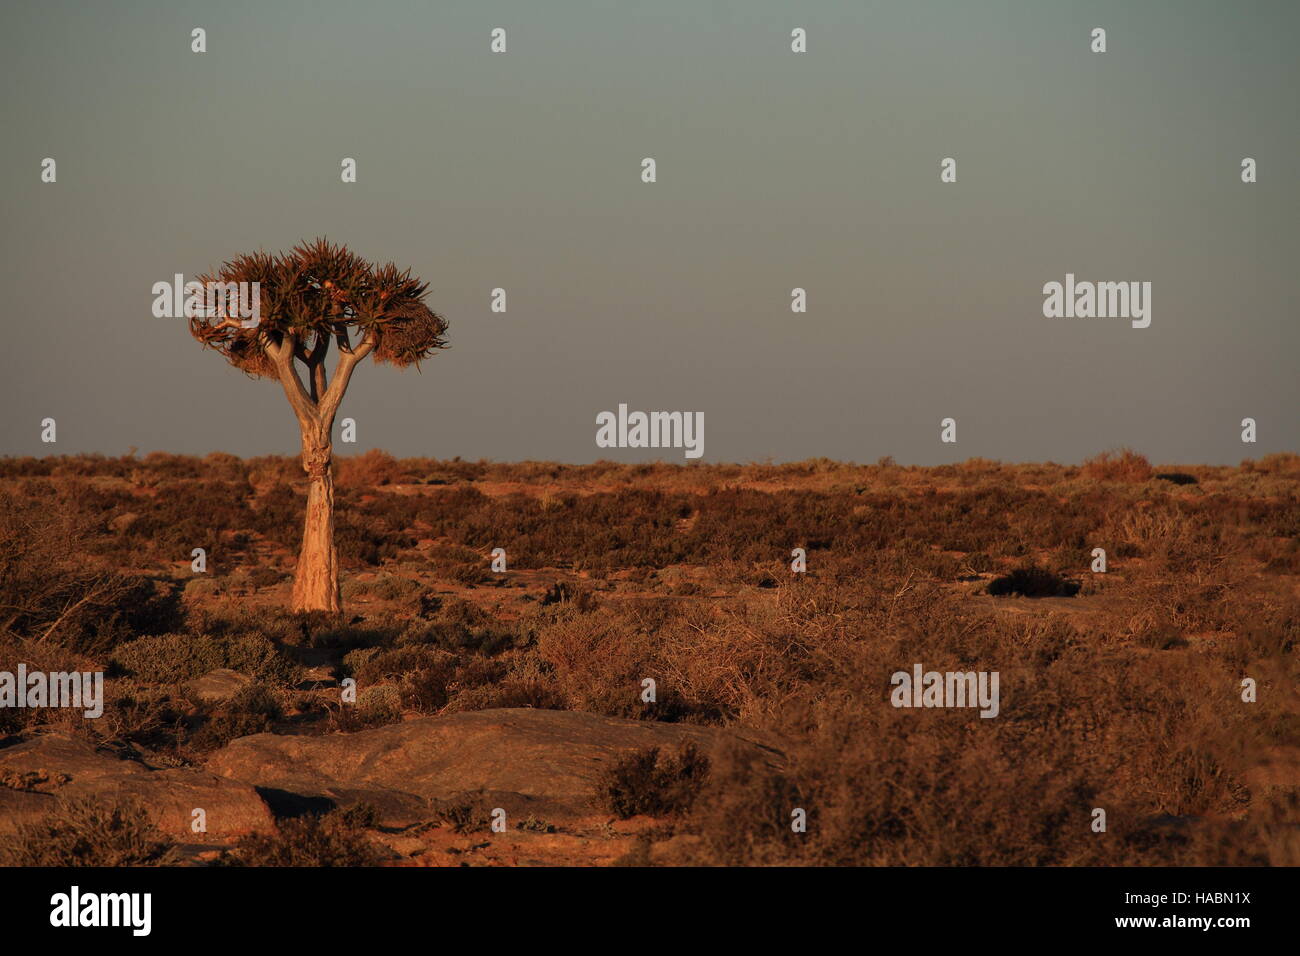 The arid and sparsely vegetated landscape with a lone quiver tree in the Namaqualand region in South Africa image with copy space in landscape format Stock Photo